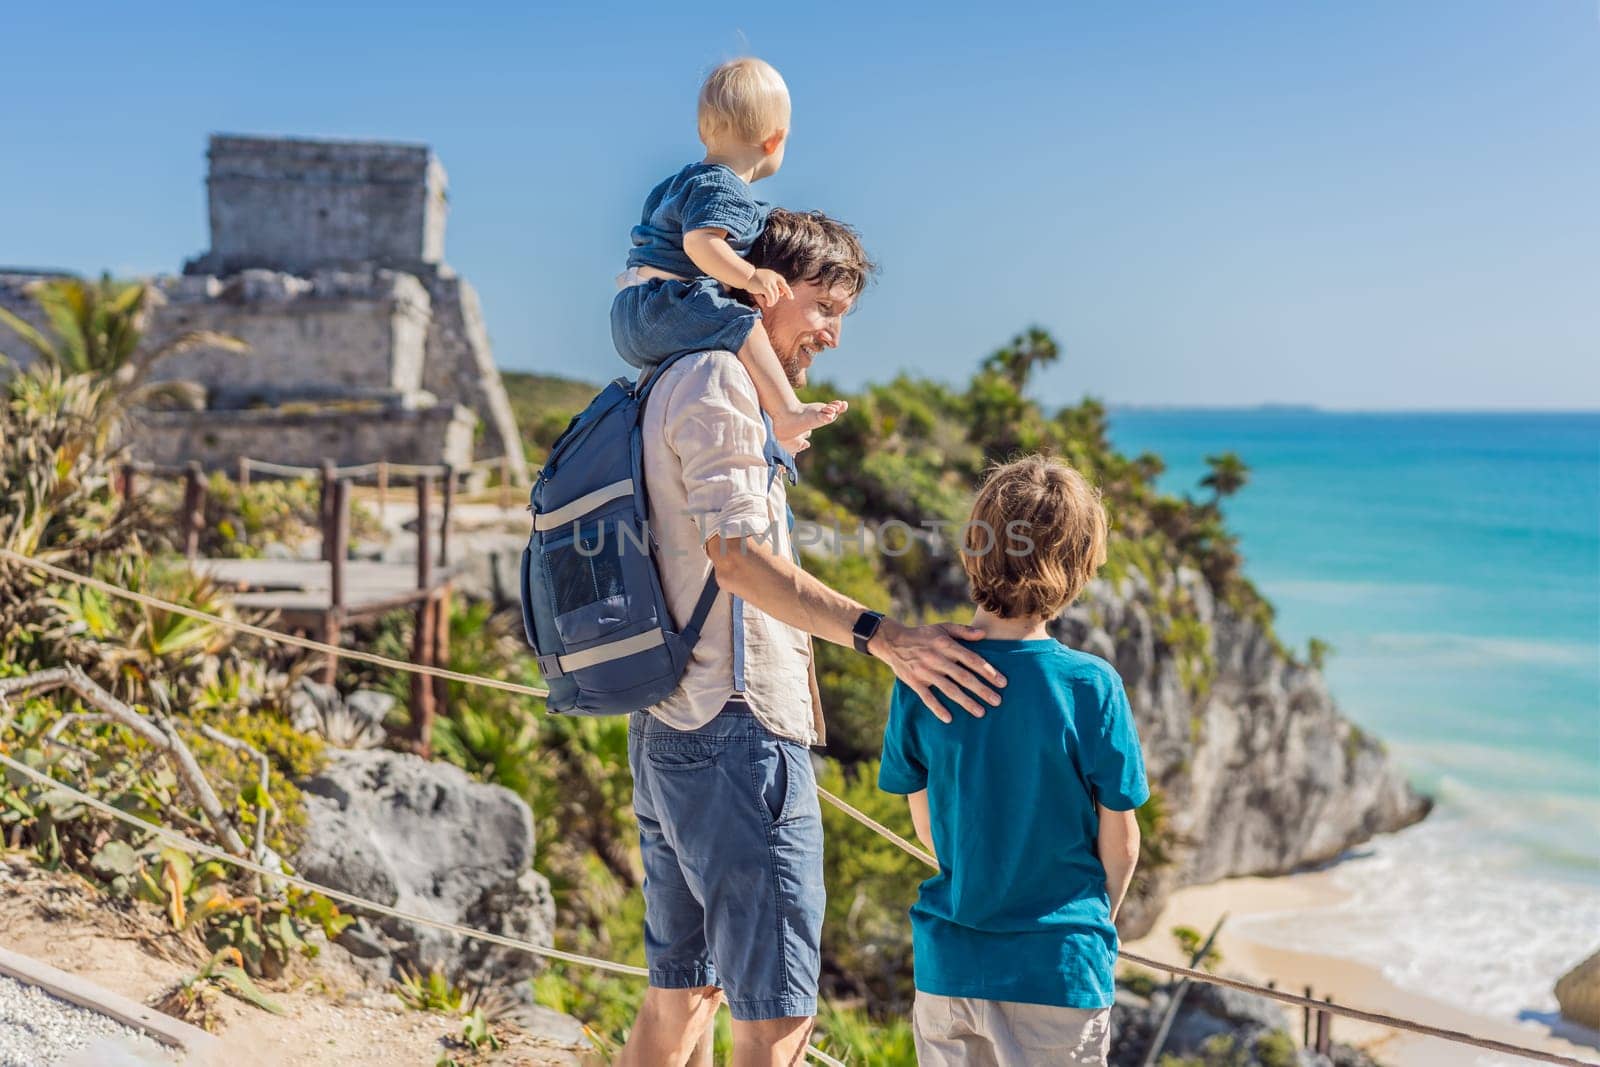 Father and two sons tourists enjoying the view Pre-Columbian Mayan walled city of Tulum, Quintana Roo, Mexico, North America, Tulum, Mexico. El Castillo - castle the Mayan city of Tulum main temple.